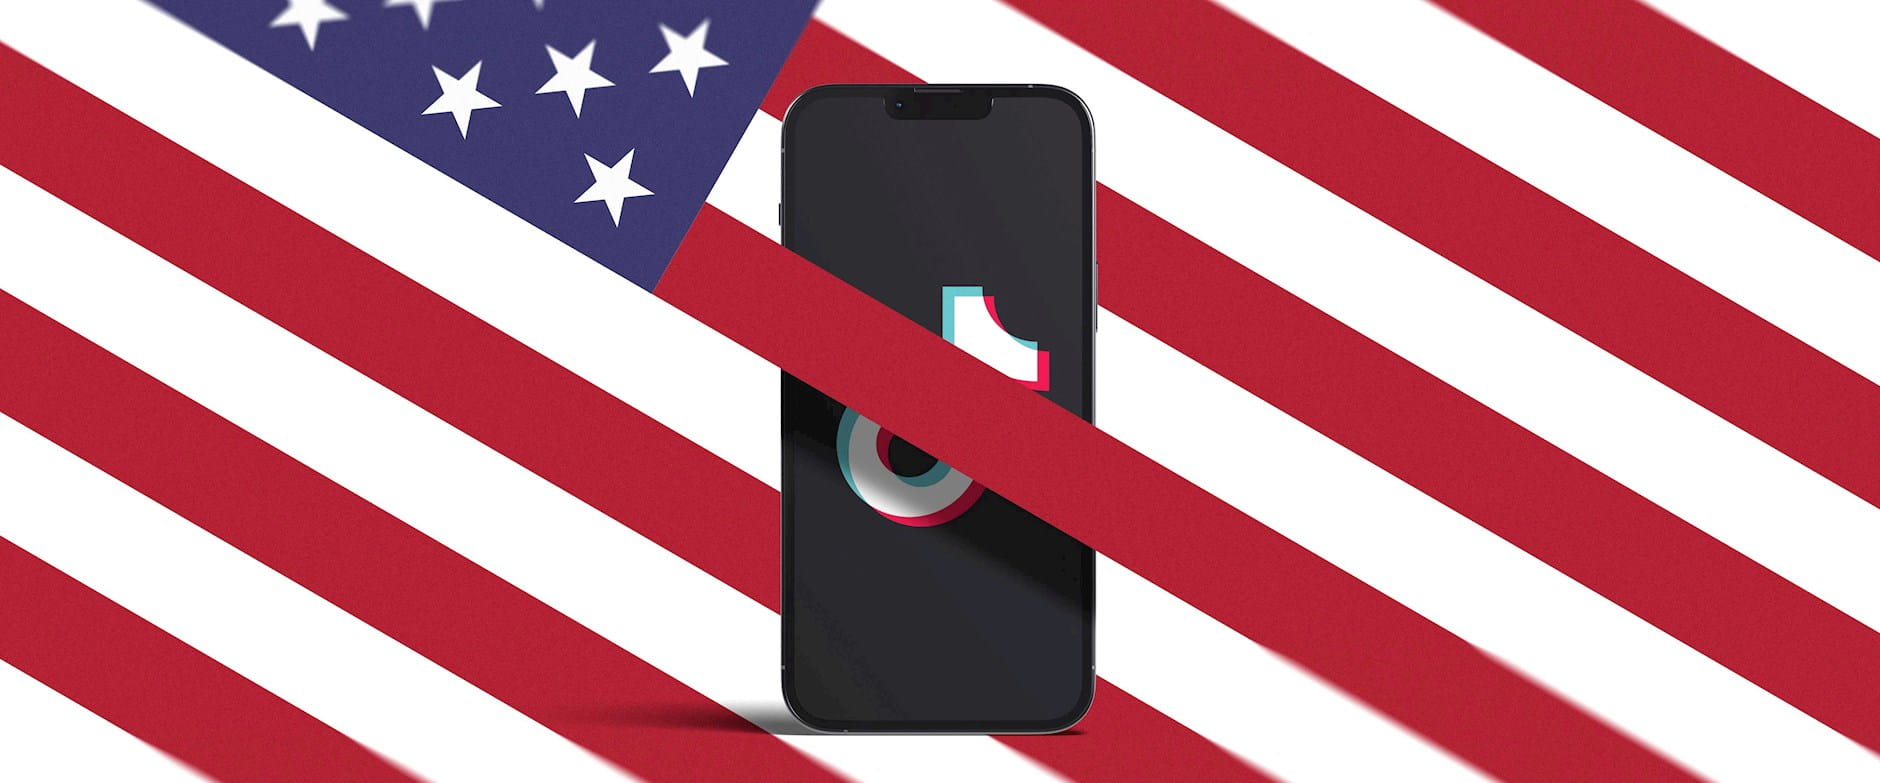 TikTok logo on a phone behind one stripe of the American flag